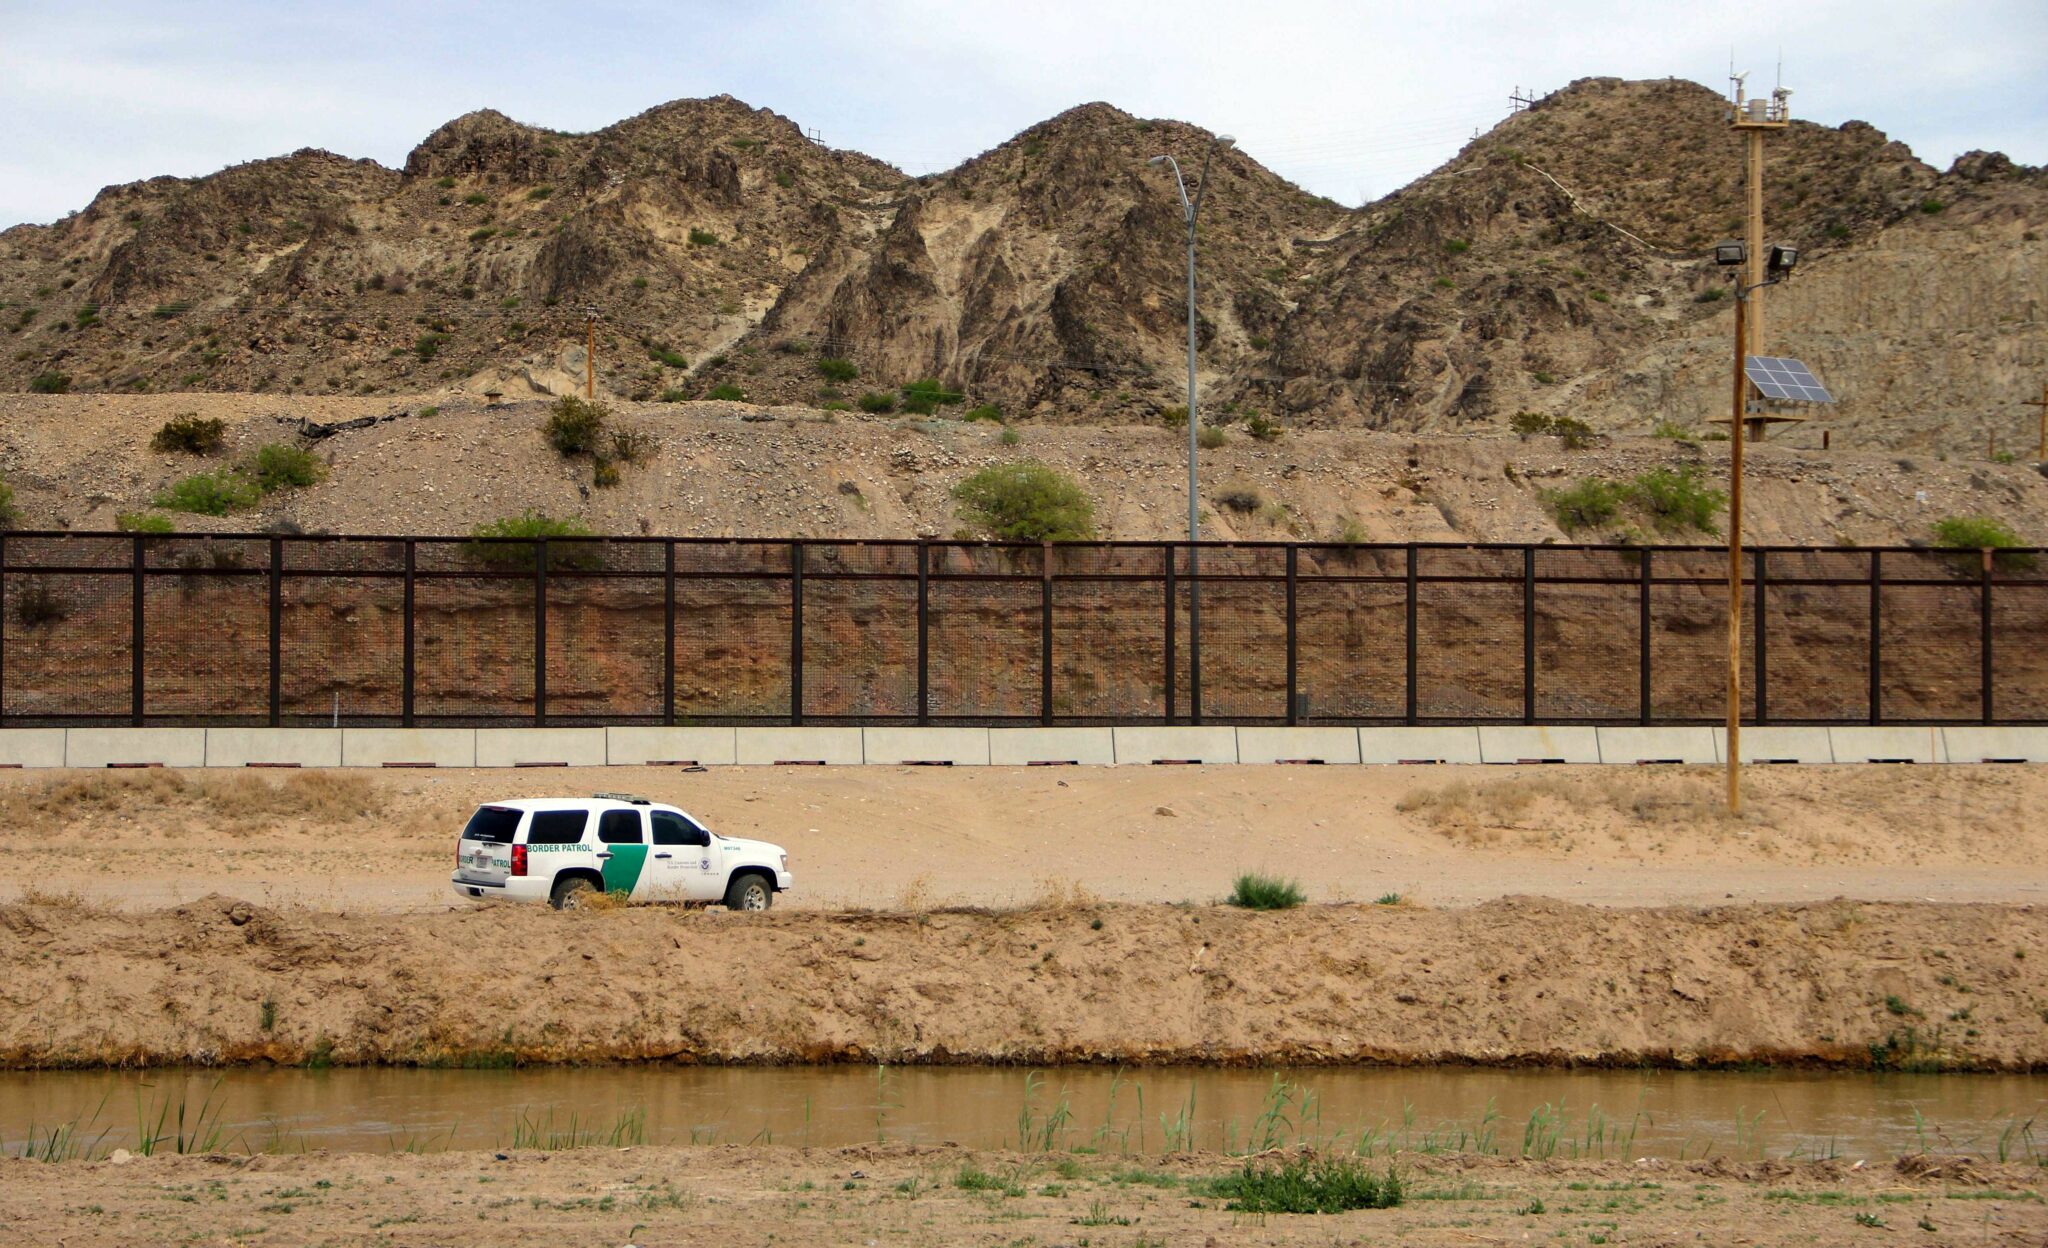 A US Border Patrol is seen from Mexico while patrolling along the border line between the cities of El Paso, Texas, in the United States, and Ciudad Juarez, Chihuahua state, Mexico on April 7, 2018. 
The US states of Texas and Arizona on Friday announced plans to send National Guard troops to the southern border with Mexico after President Donald Trump ordered a thousands-strong deployment to combat drug trafficking and illegal immigration. / AFP PHOTO / HERIKA MARTINEZ        (Photo credit should read HERIKA MARTINEZ/AFP via Getty Images)